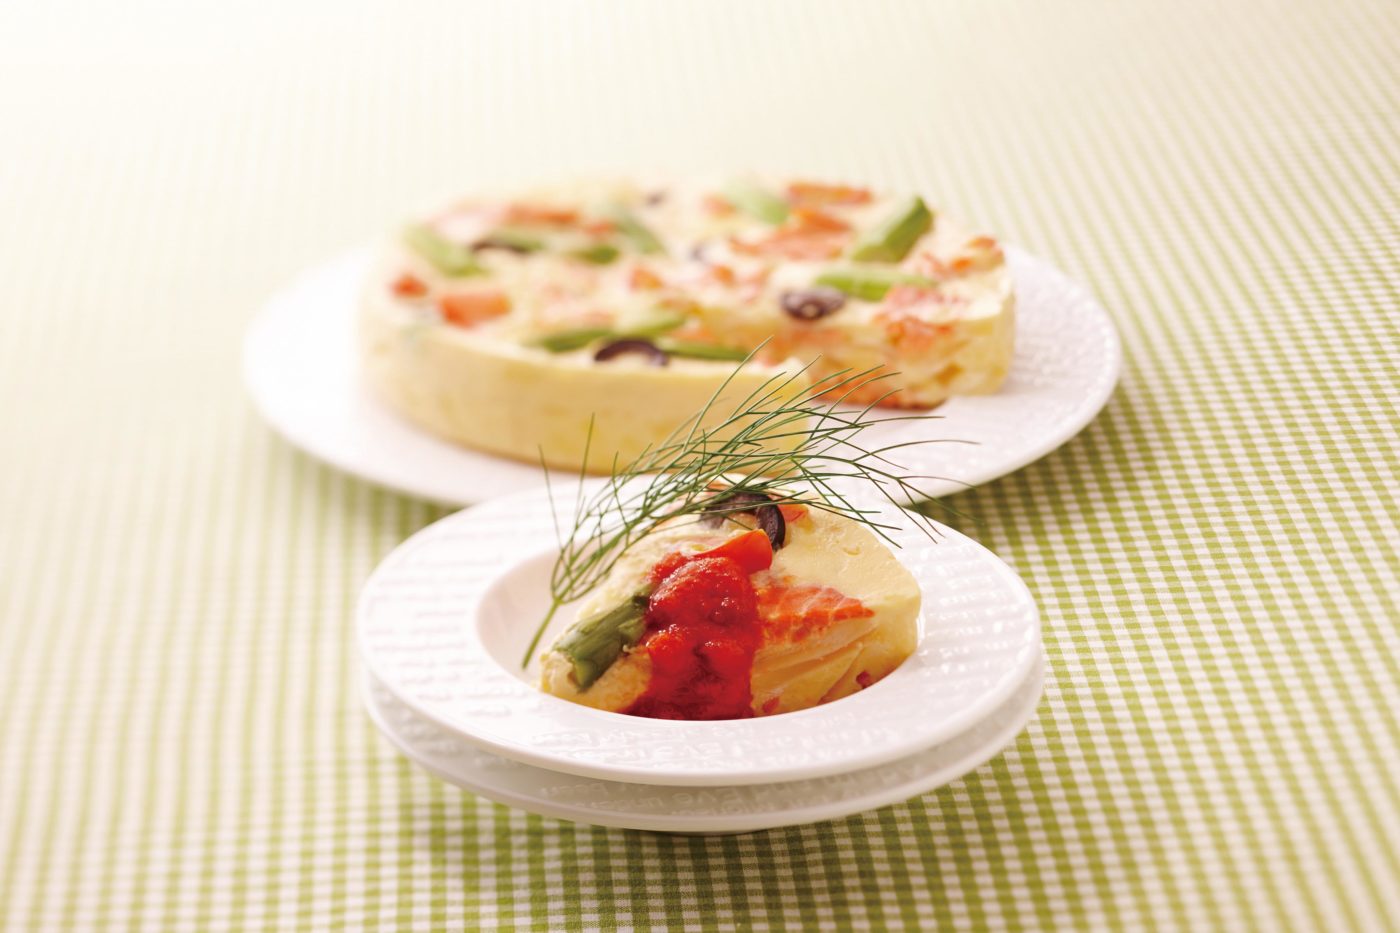 Smoked Salmon And Asparagus Quiche - For this asparagus quiche, we swapped the meat you’d normally find in a traditional quiche for heart-healthy smoked salmon - and made it low-carb by omitting the crust. #quicherecipe #healthyrecipe #ricecooker #multicooker | Tiger USA